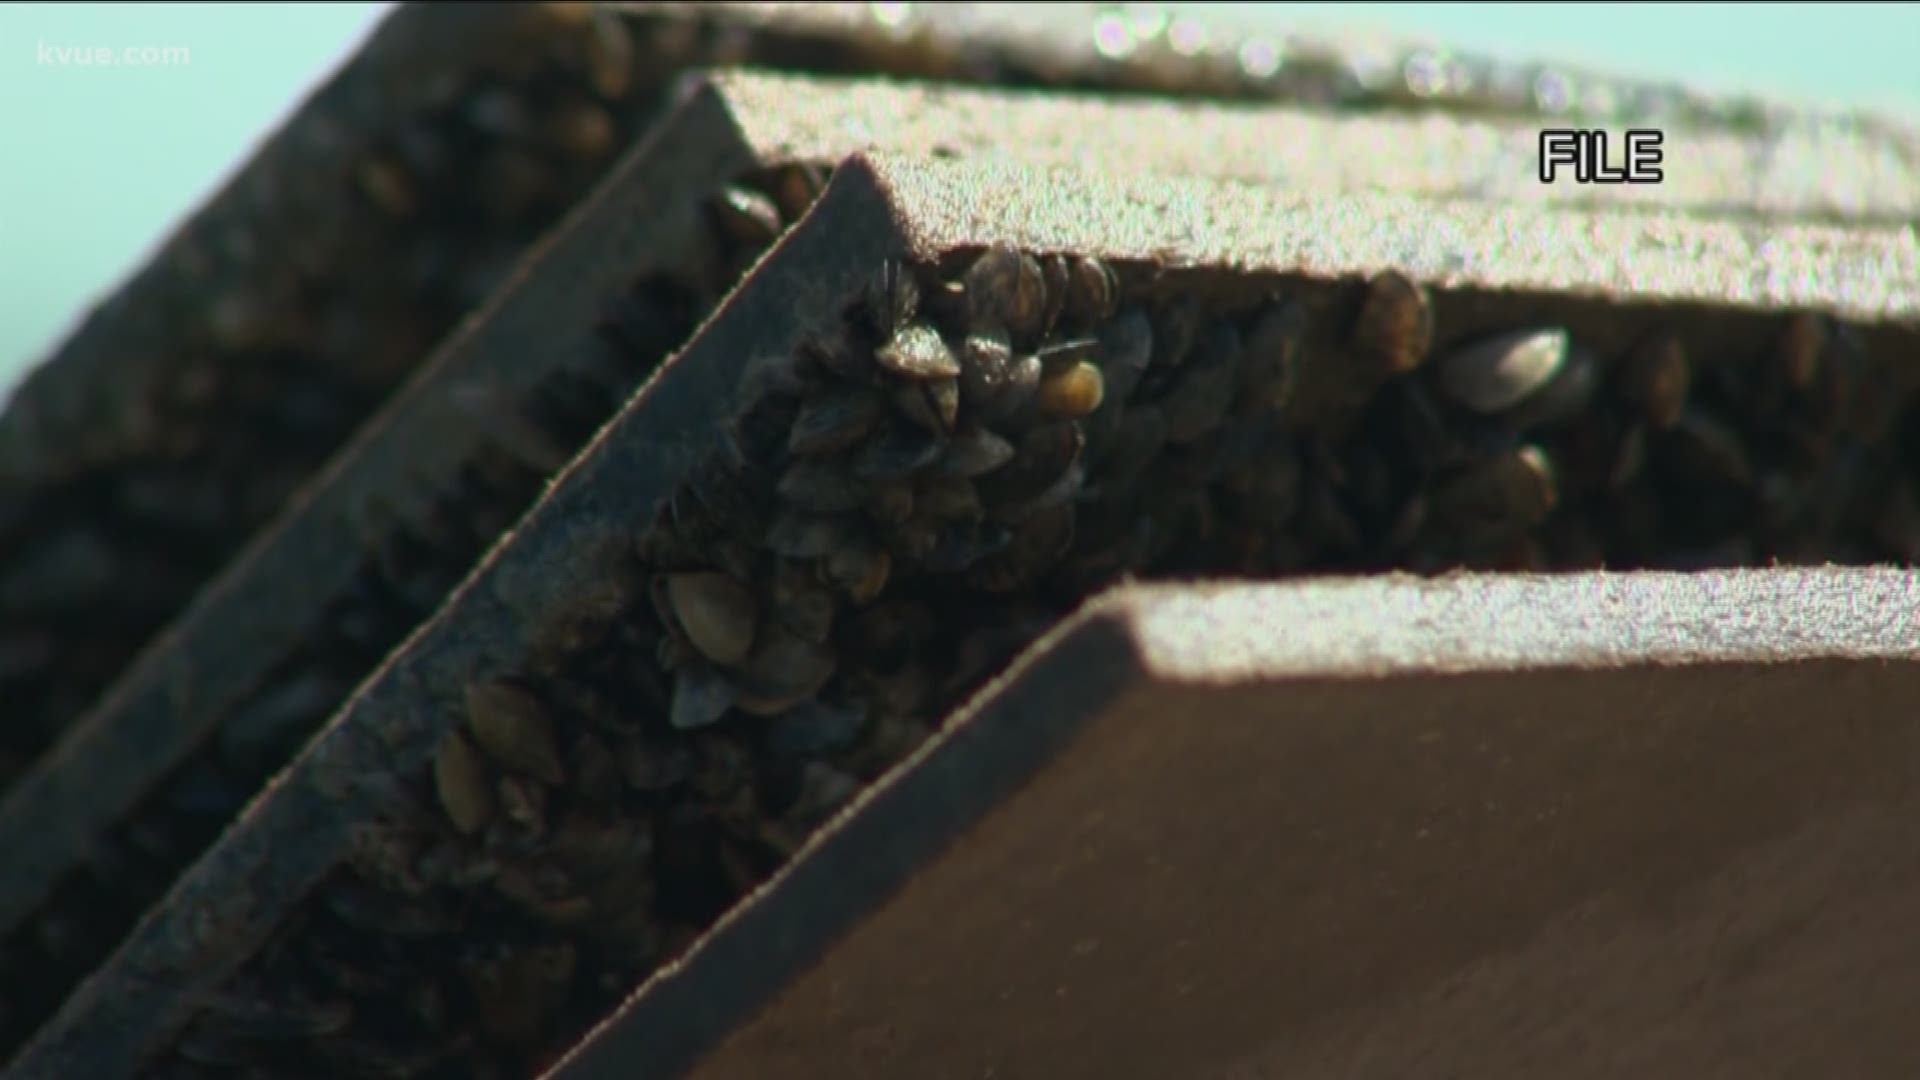 Zebra mussels have been found to be what is causing the stench in the Austin water supply after the mussels attached themselves to a raw water pipeline that was shut down for two weeks before coming back on.